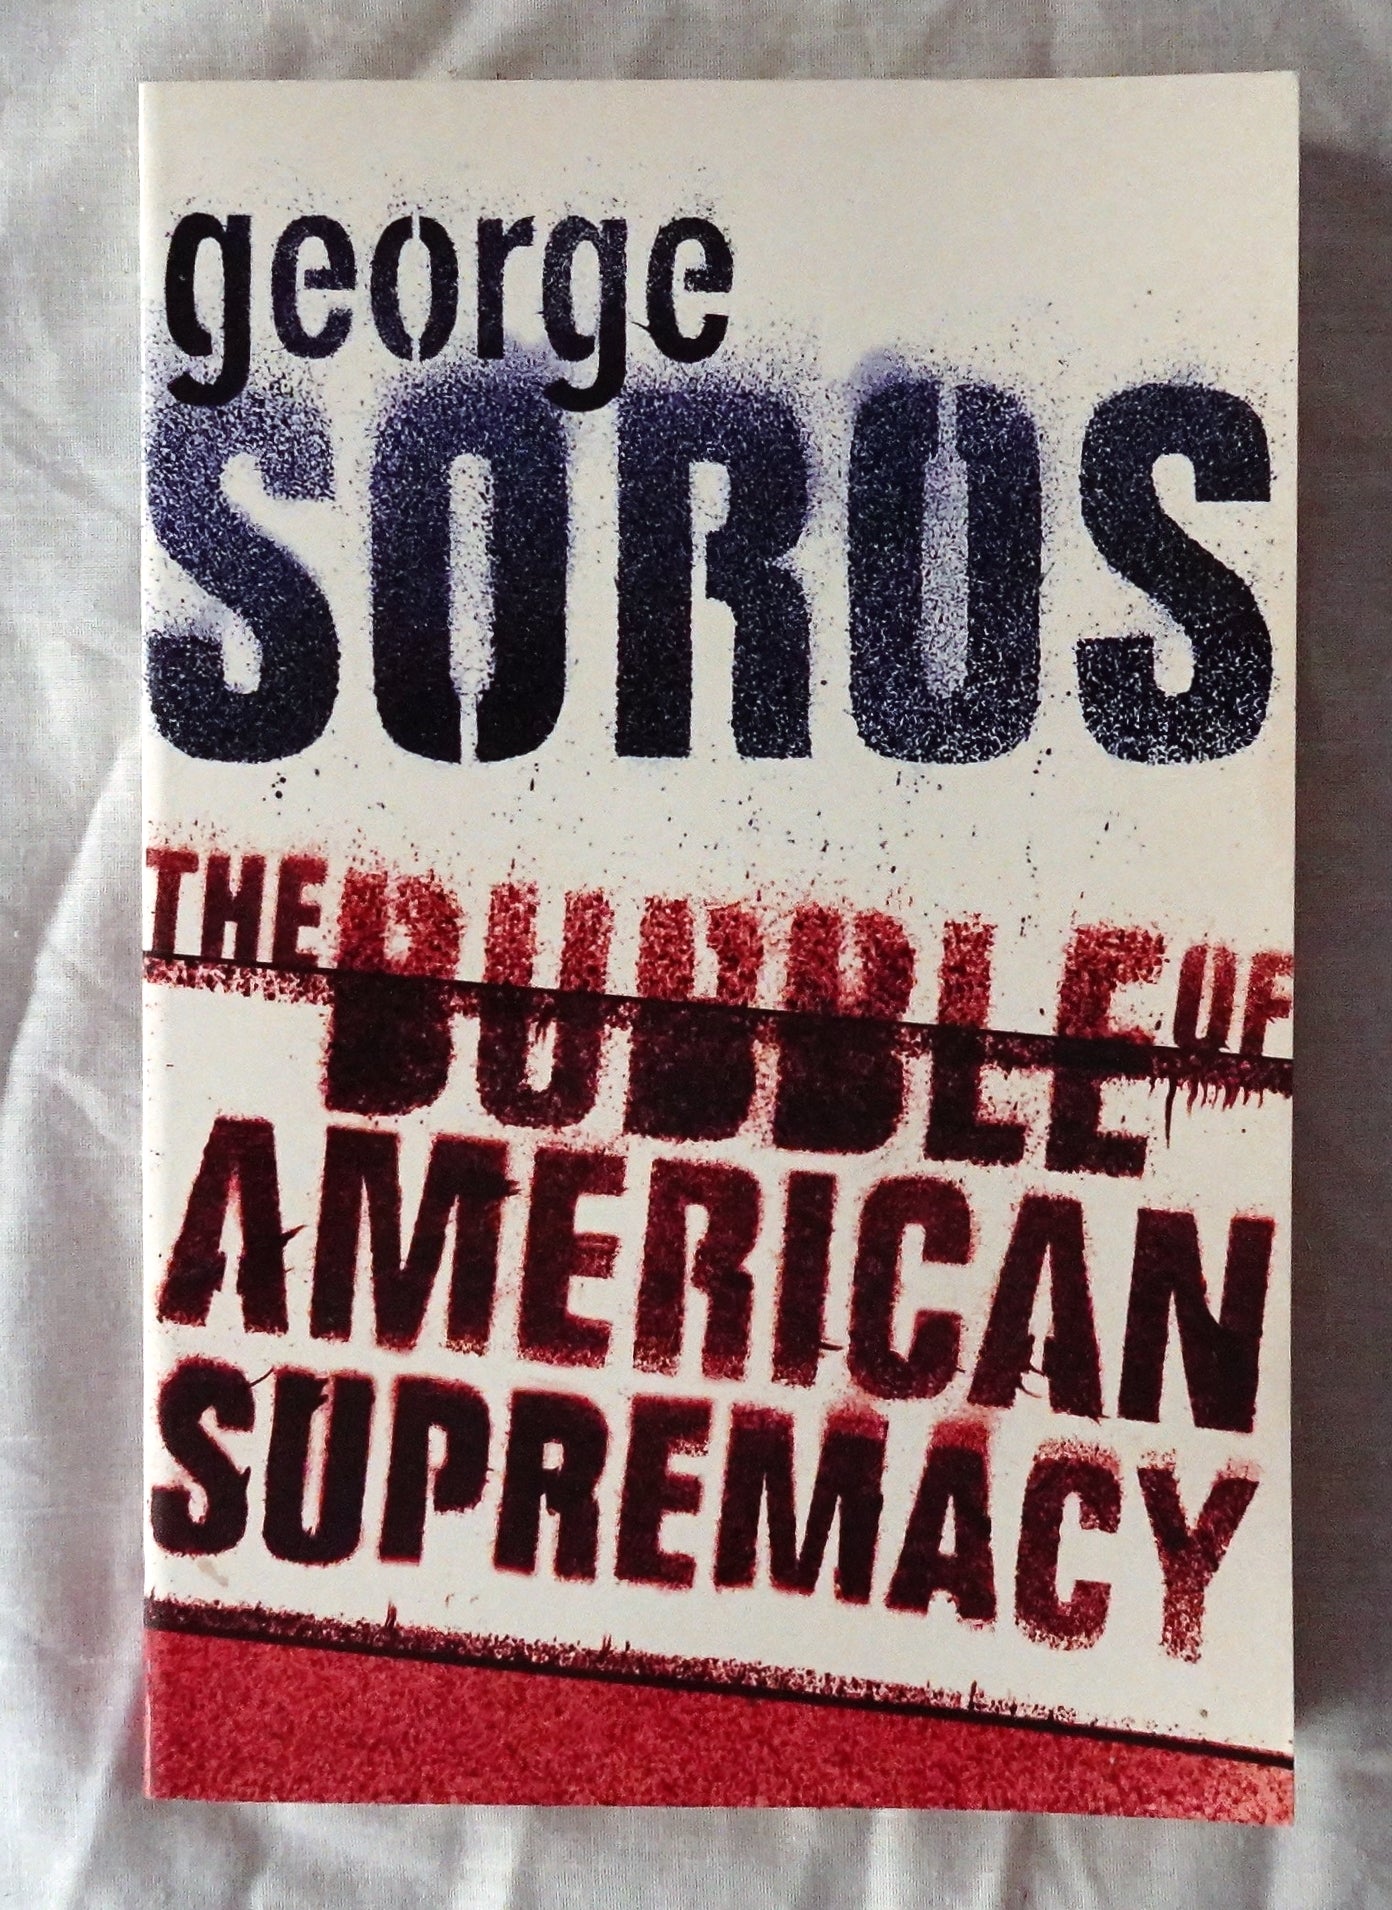 The Bubble of American Supremacy  by George Soros